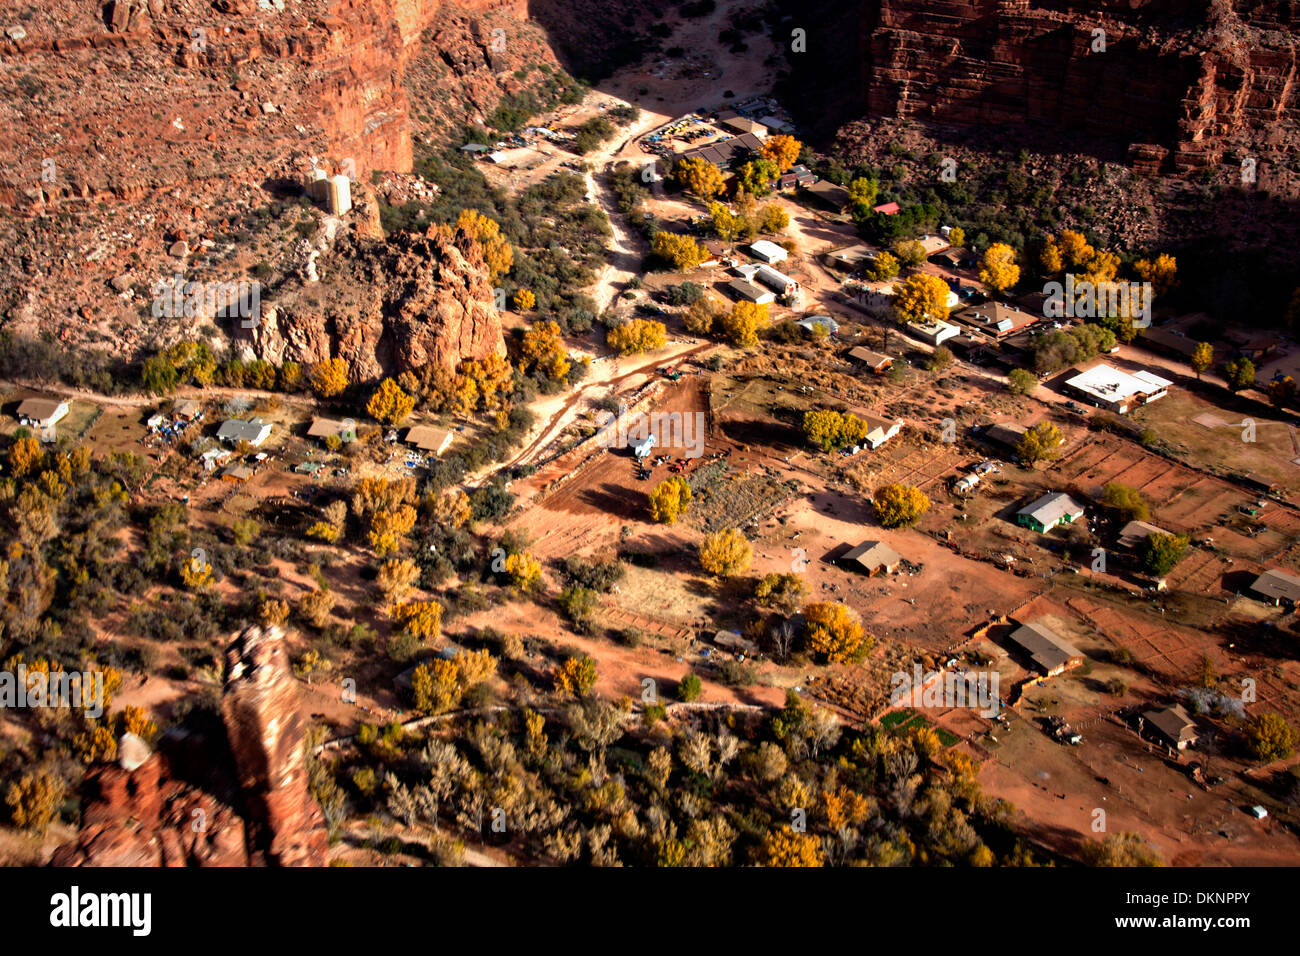 Aerial view of the Havasupai Indian village of Supai located at the bottom of the Grand Canyon December 4, 2012 in Supai, AZ. Stock Photo